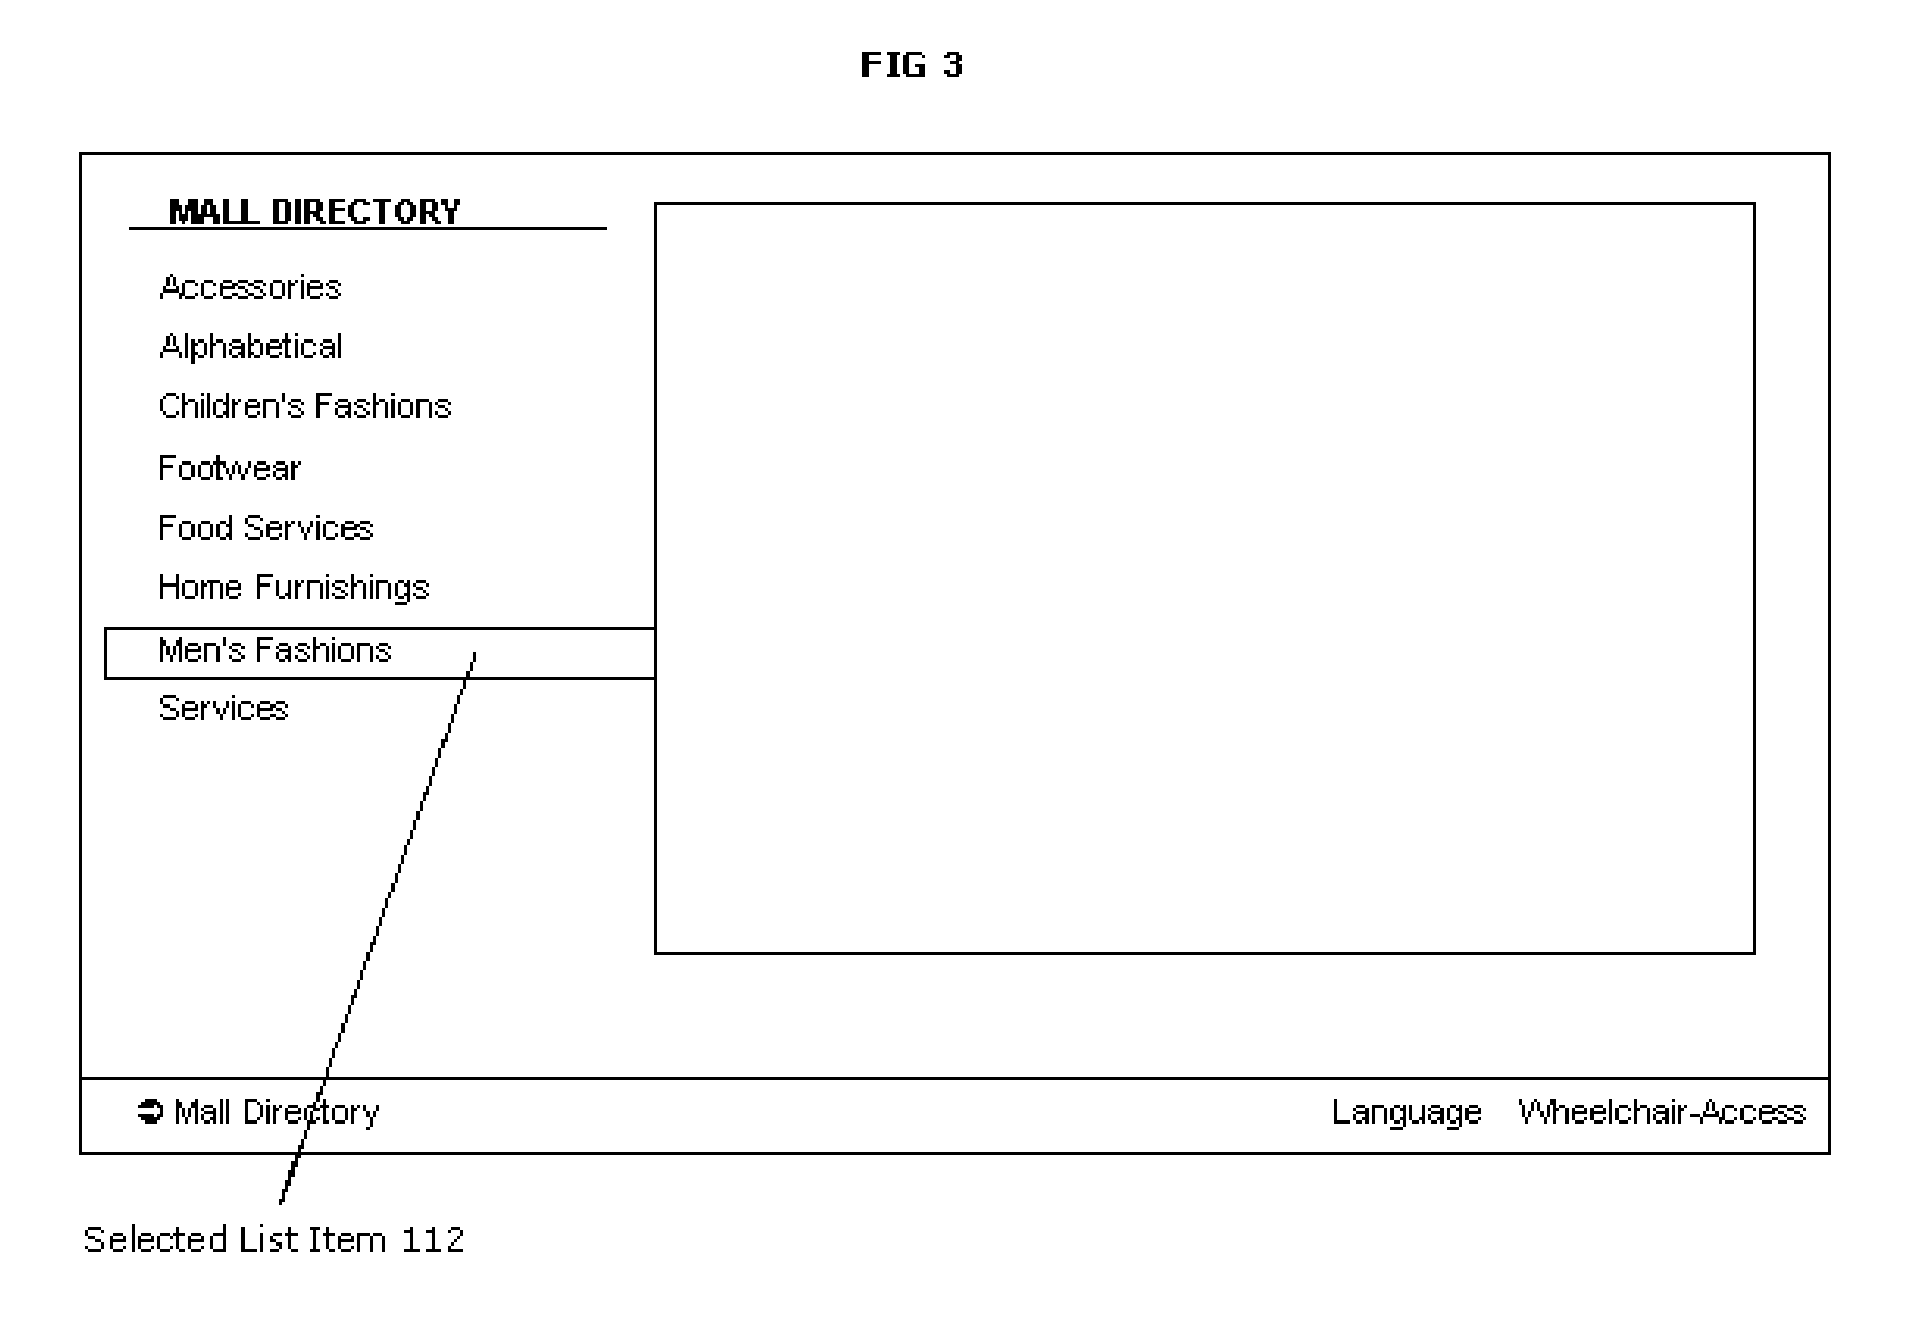 User Interface for Large-Format Interactive Display Systems